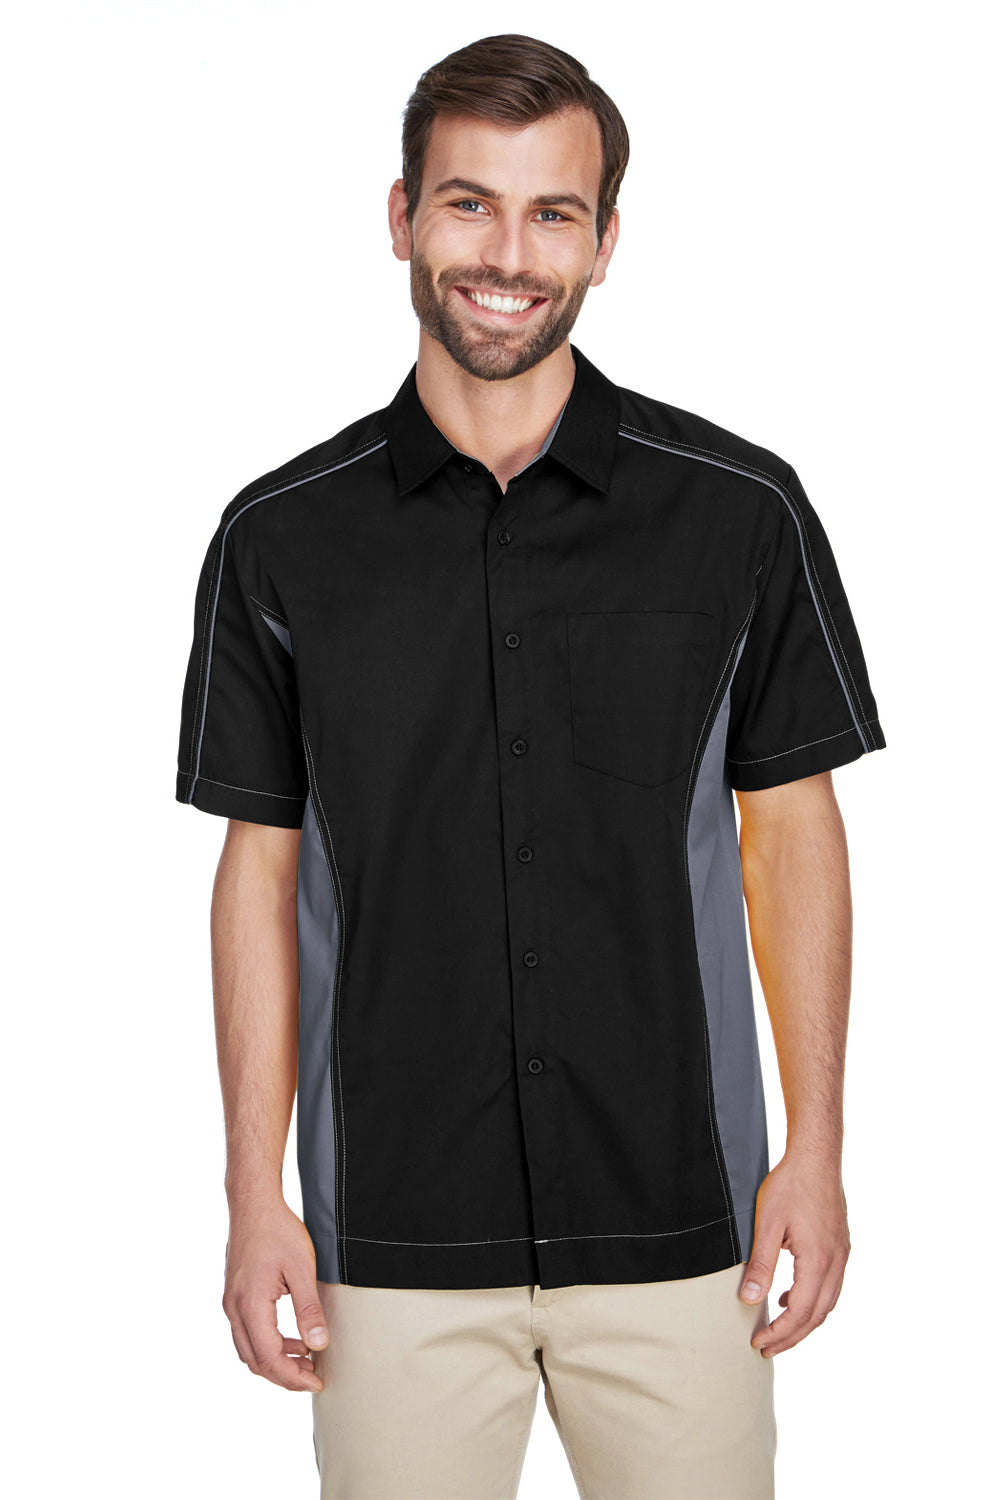 North End 87042 Mens Fuse Short Sleeve Button Down Shirt w/ Pocket Black/Grey Front